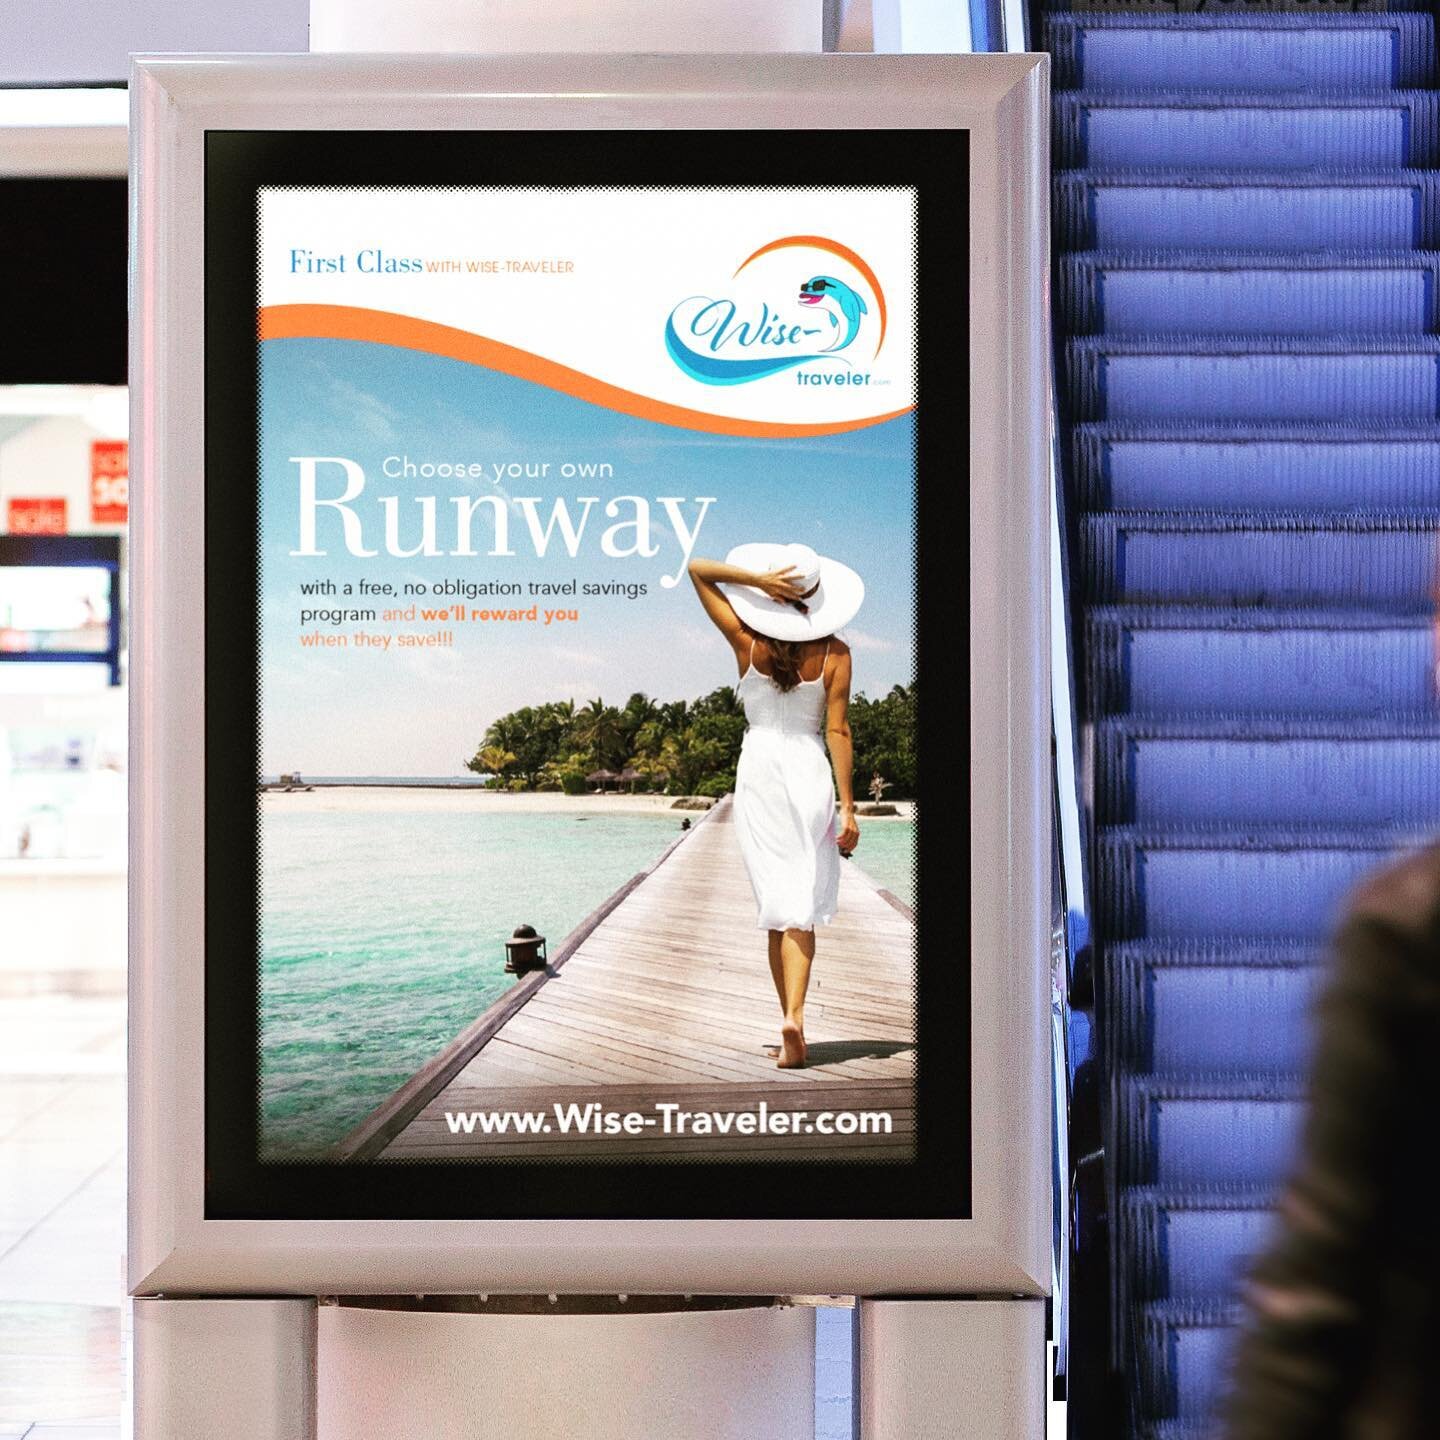 Choose your own runway
Advert I designed for a travel company. 
This advert just makes me want to book a holiday. 

Www.wise-traveler.com

#graphicdesign#design #advert #graphicaddict #travel #holiday #vacation #beach #sunseasand #sun #sea #sand #pos